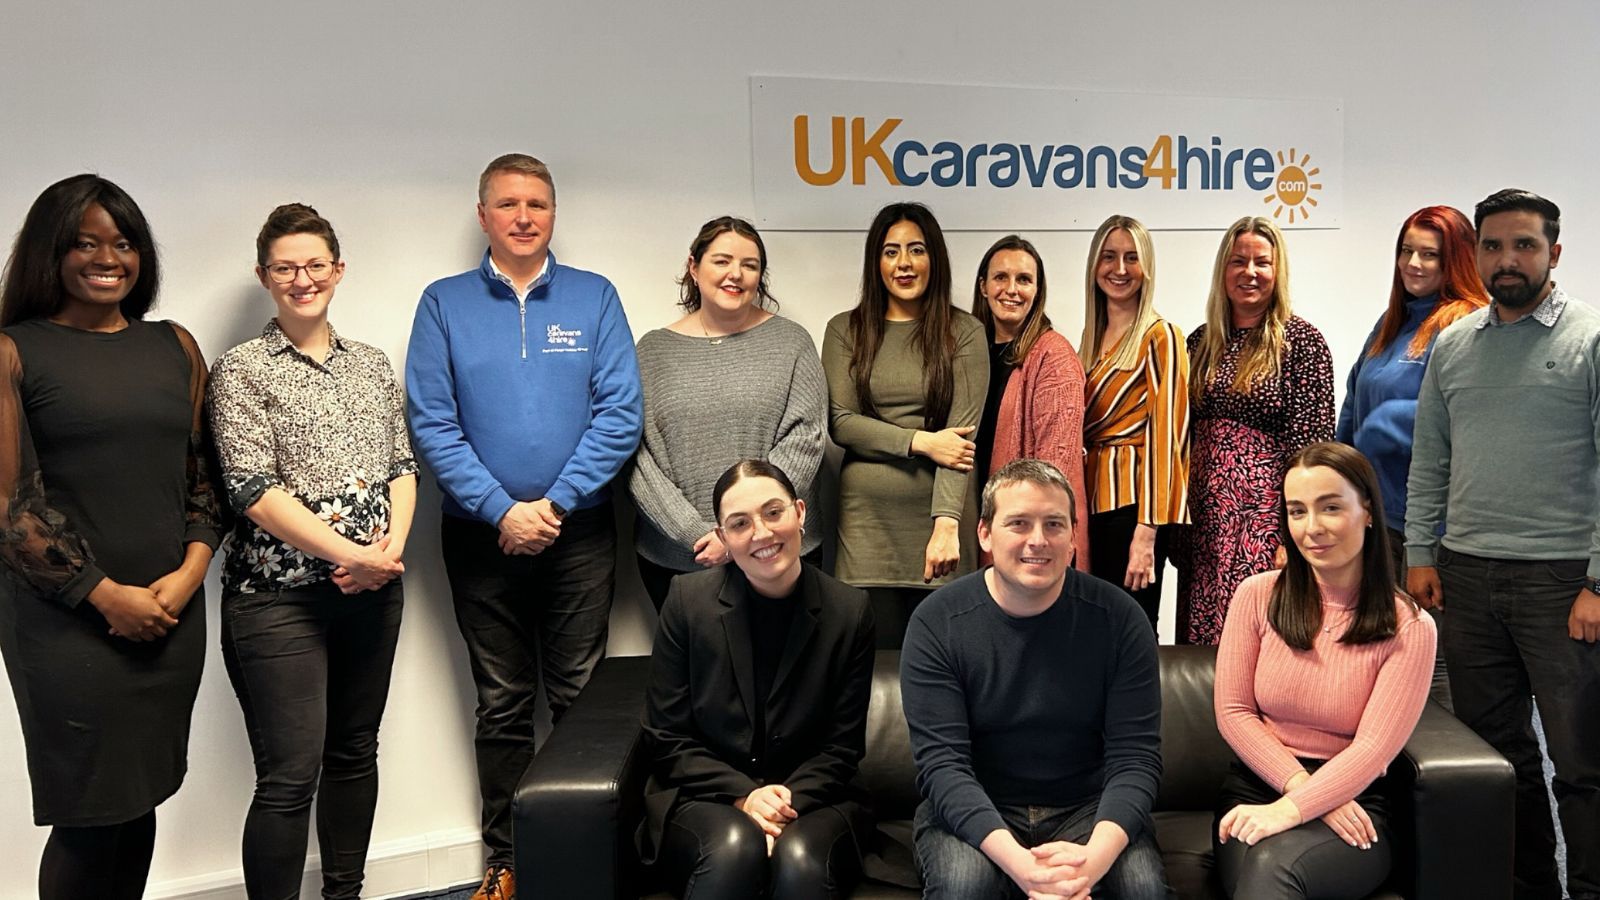 UKcaravans4hire.com reappoints Wild PR to support ambitious growth